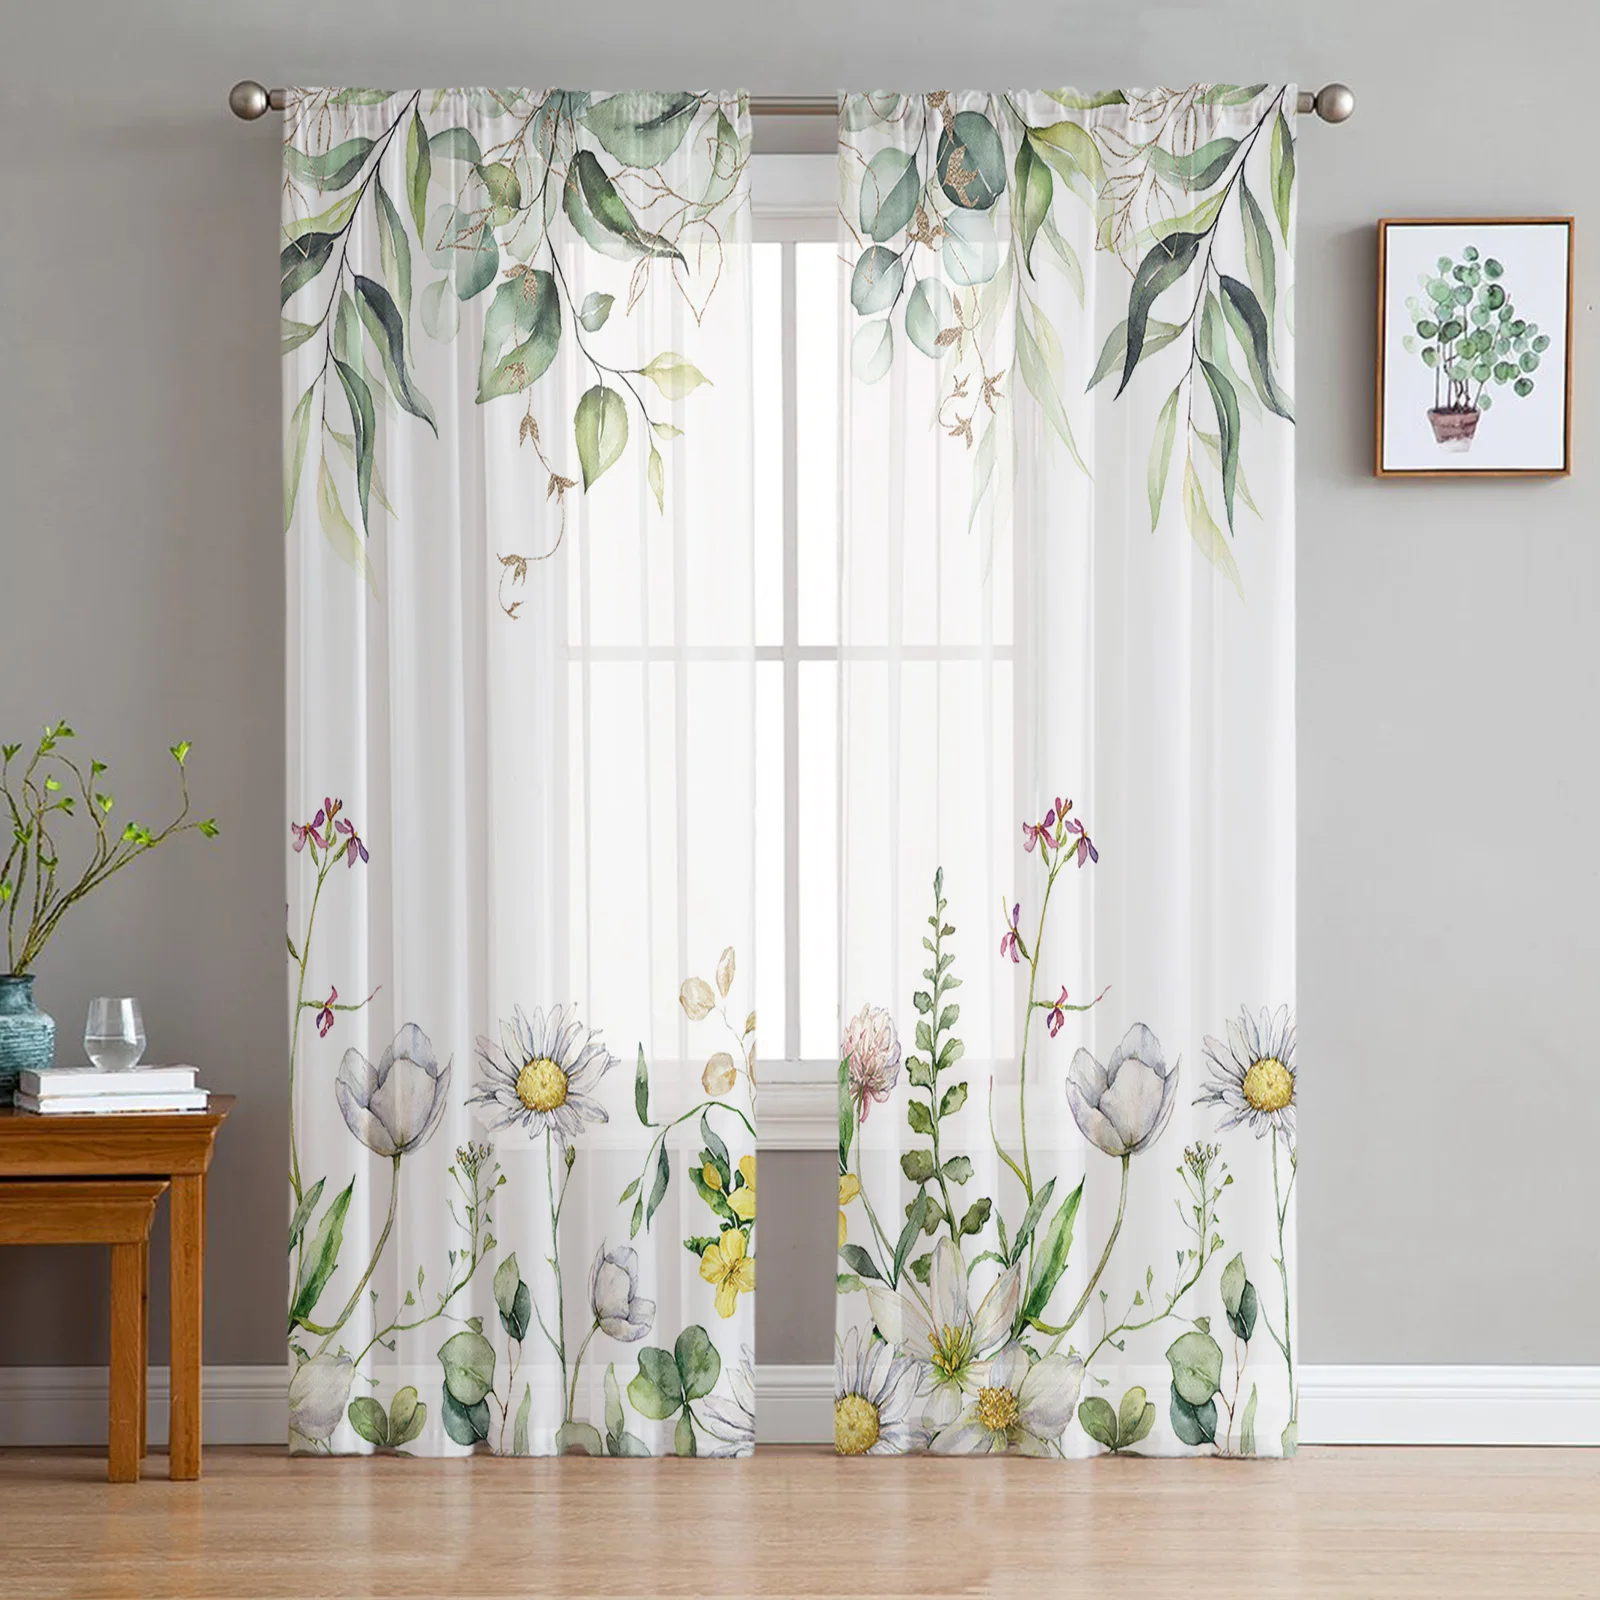 

Plant Chamomile Geranium Eucalyptus Sheer Curtains Living Room Bedroom Kitchen Decoration Window Voiles Organza Tulle Curtain